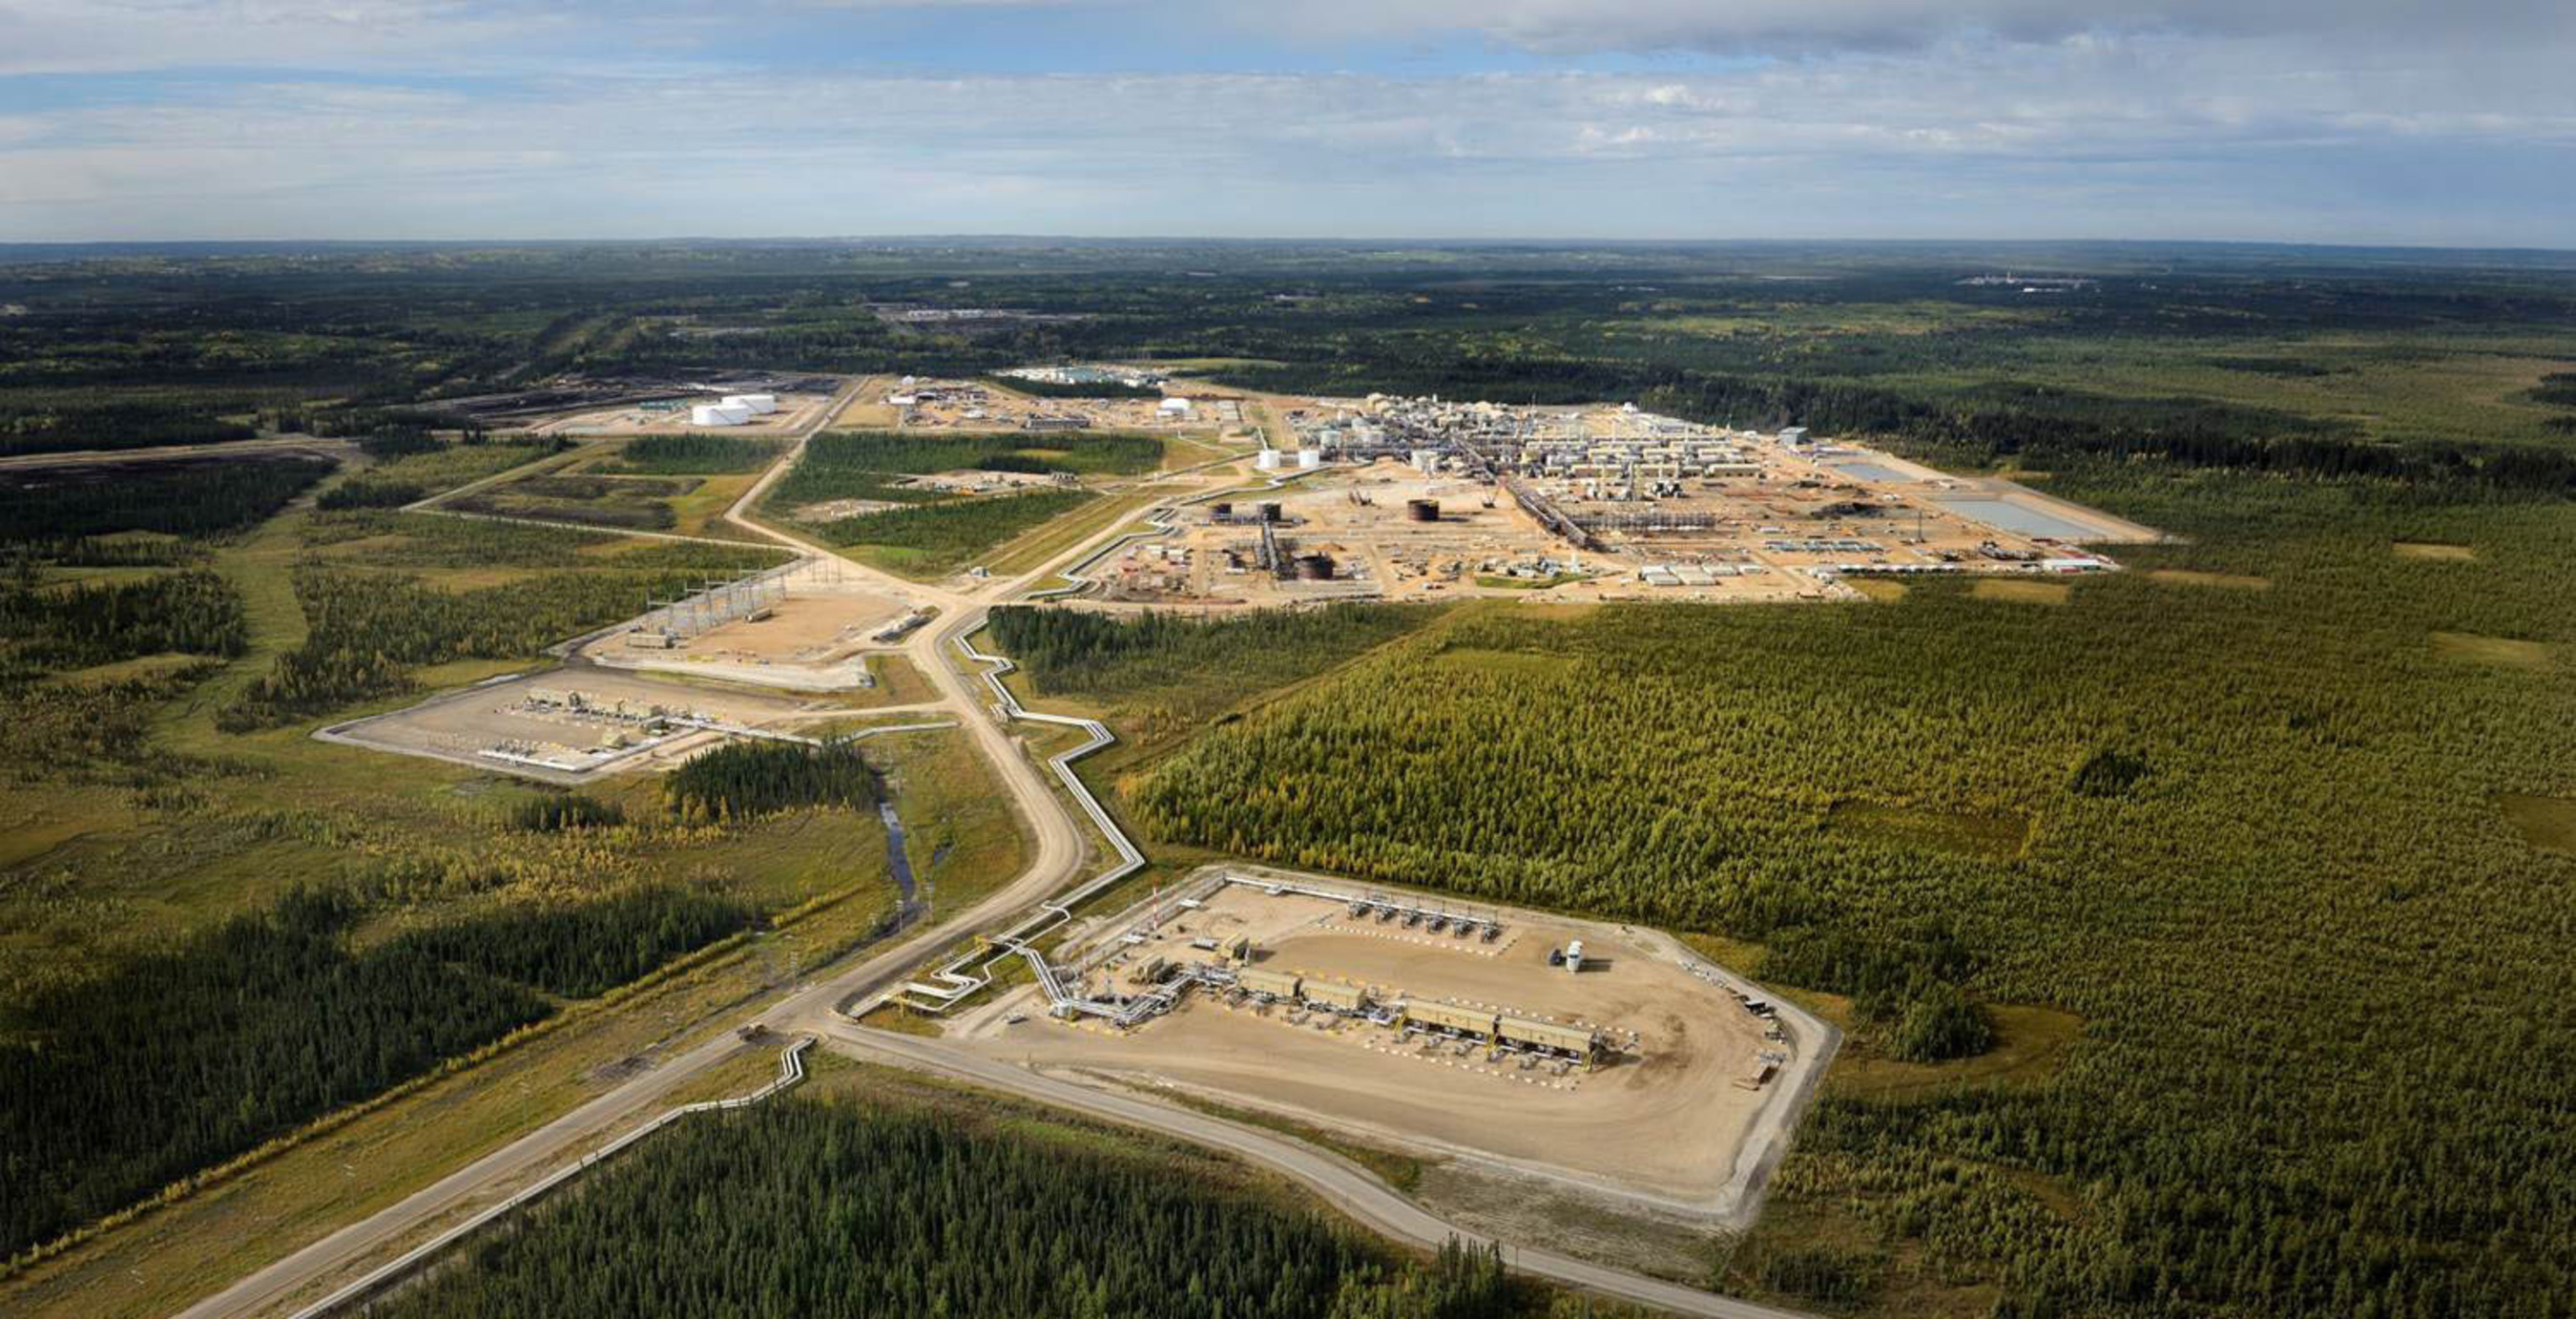 Cenovus's Christina Lake operation in northern Alberta uses specialized methods to drill and pump the oil to the surface (CNW Group/Cenovus Energy Inc.) (PRNewsFoto/Cenovus Energy Inc.)